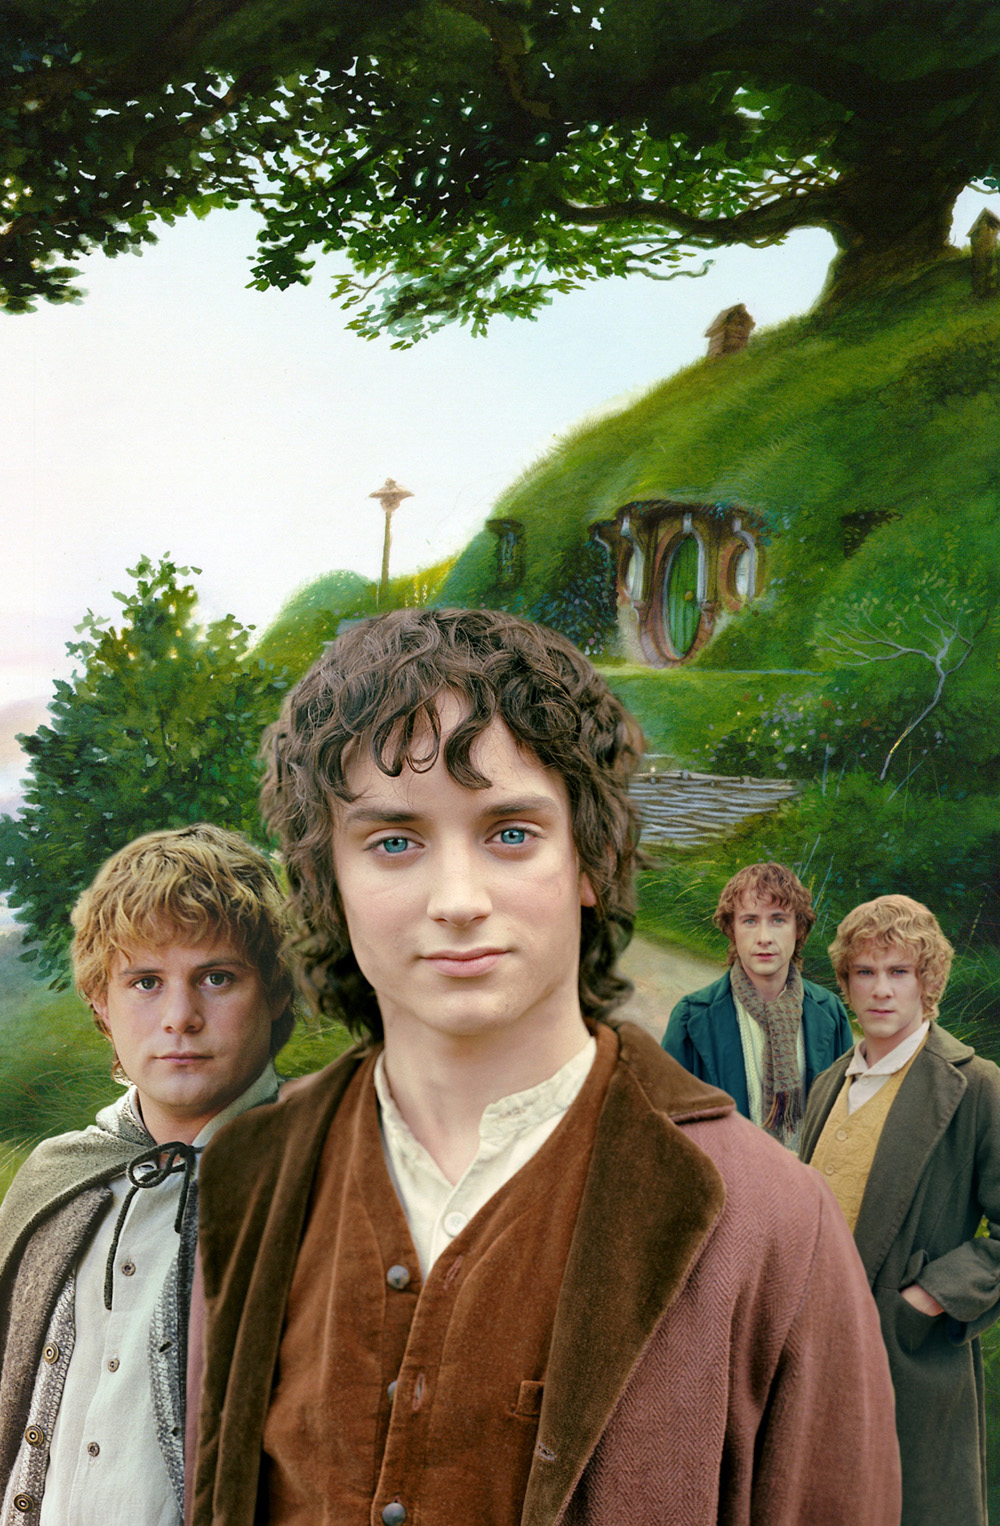 The Lord Of The Rings Film Trilogy Cast List: Actors and Actresses from The  Lord Of The Rings Film Trilogy